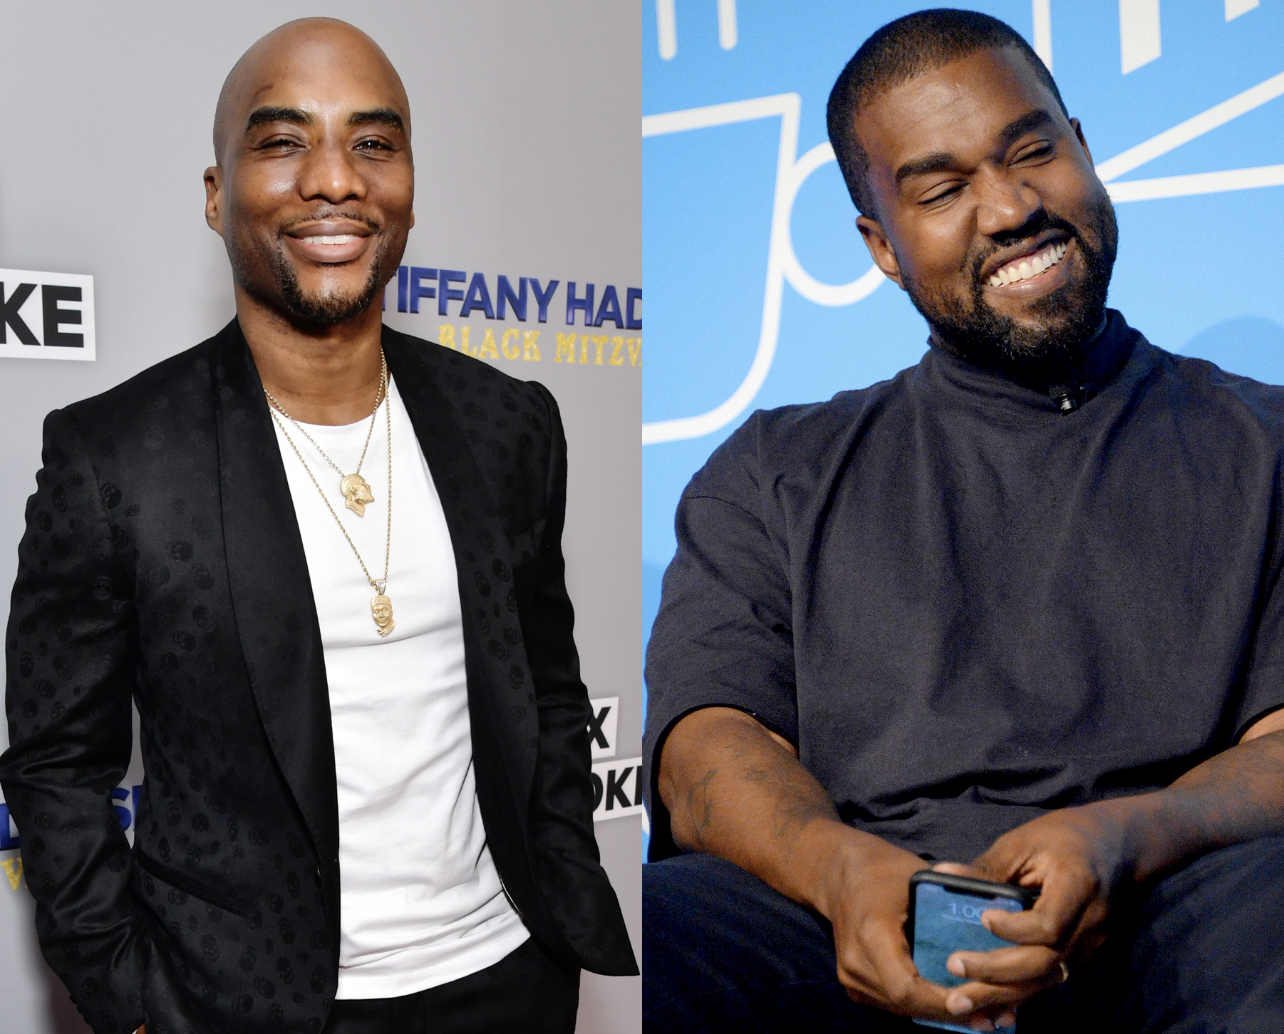 Charlamagne Tells Kanye To “Let The Marriage Go” Following His Recent Jabs At Kim Kardashian & Pete Davidson